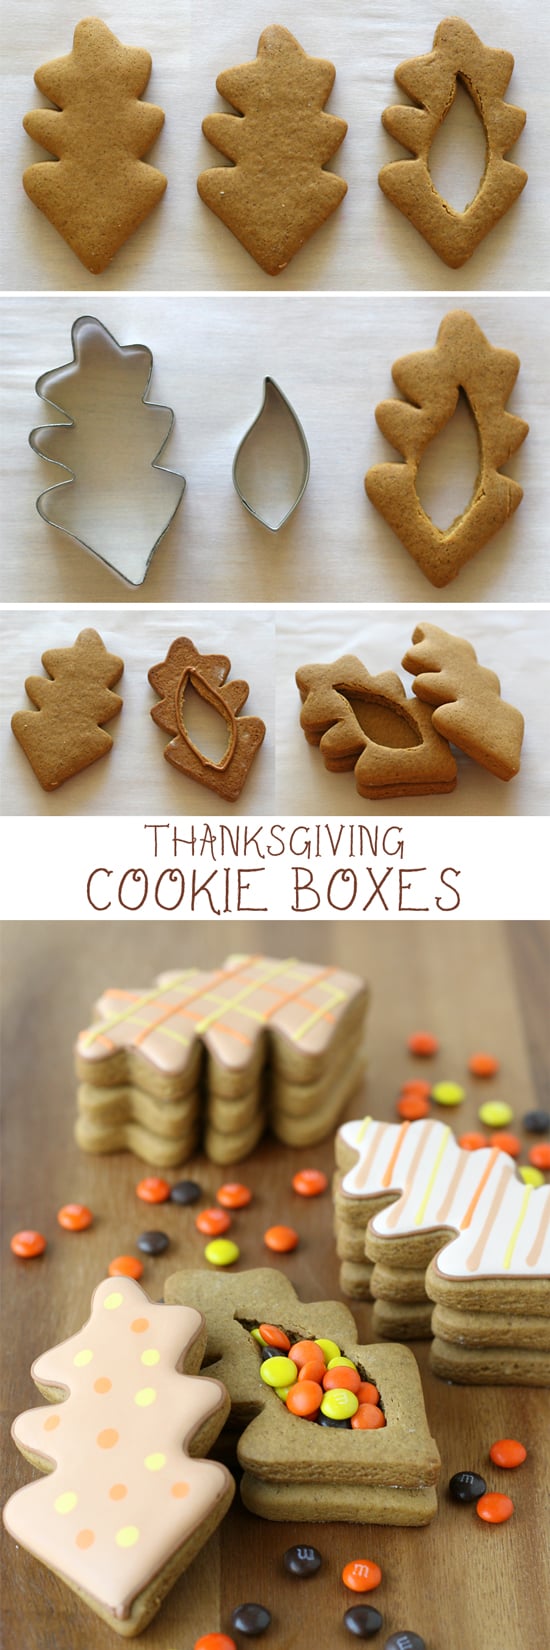 Thanksgiving Cookie Boxes - Such a cute and creative idea!  